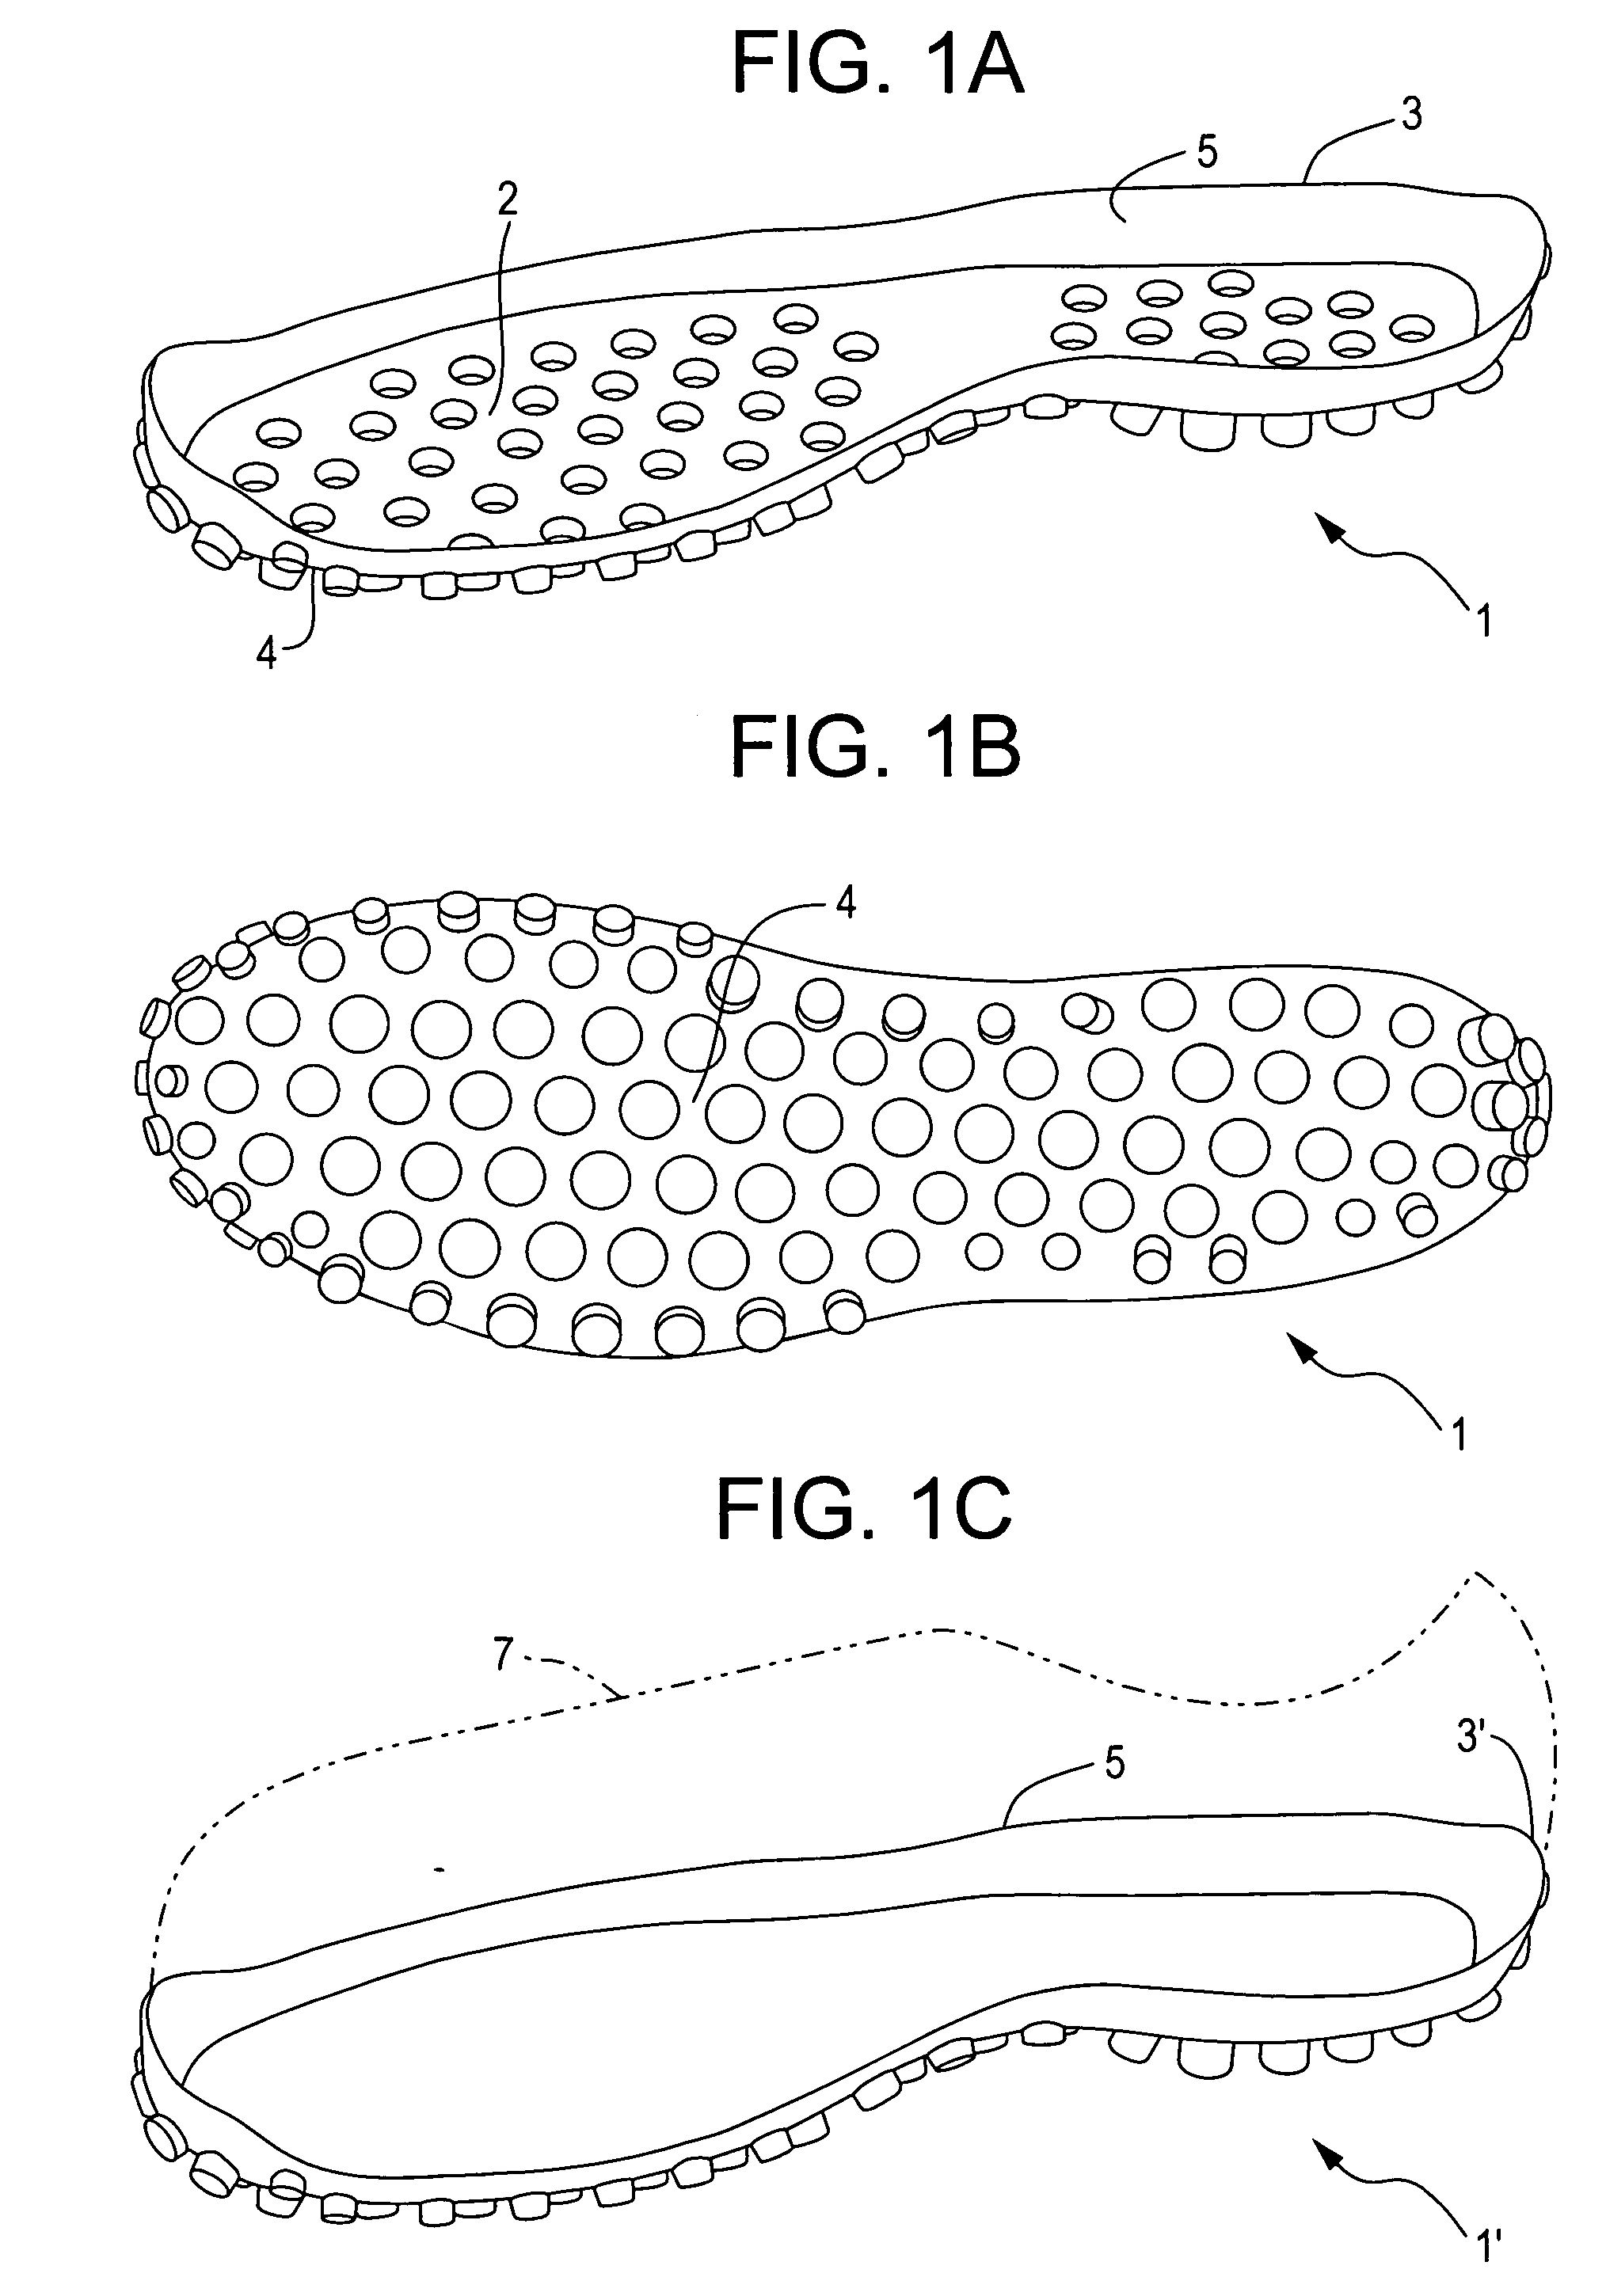 Method of making a multi-element mold assembly for, e.g., footwear components